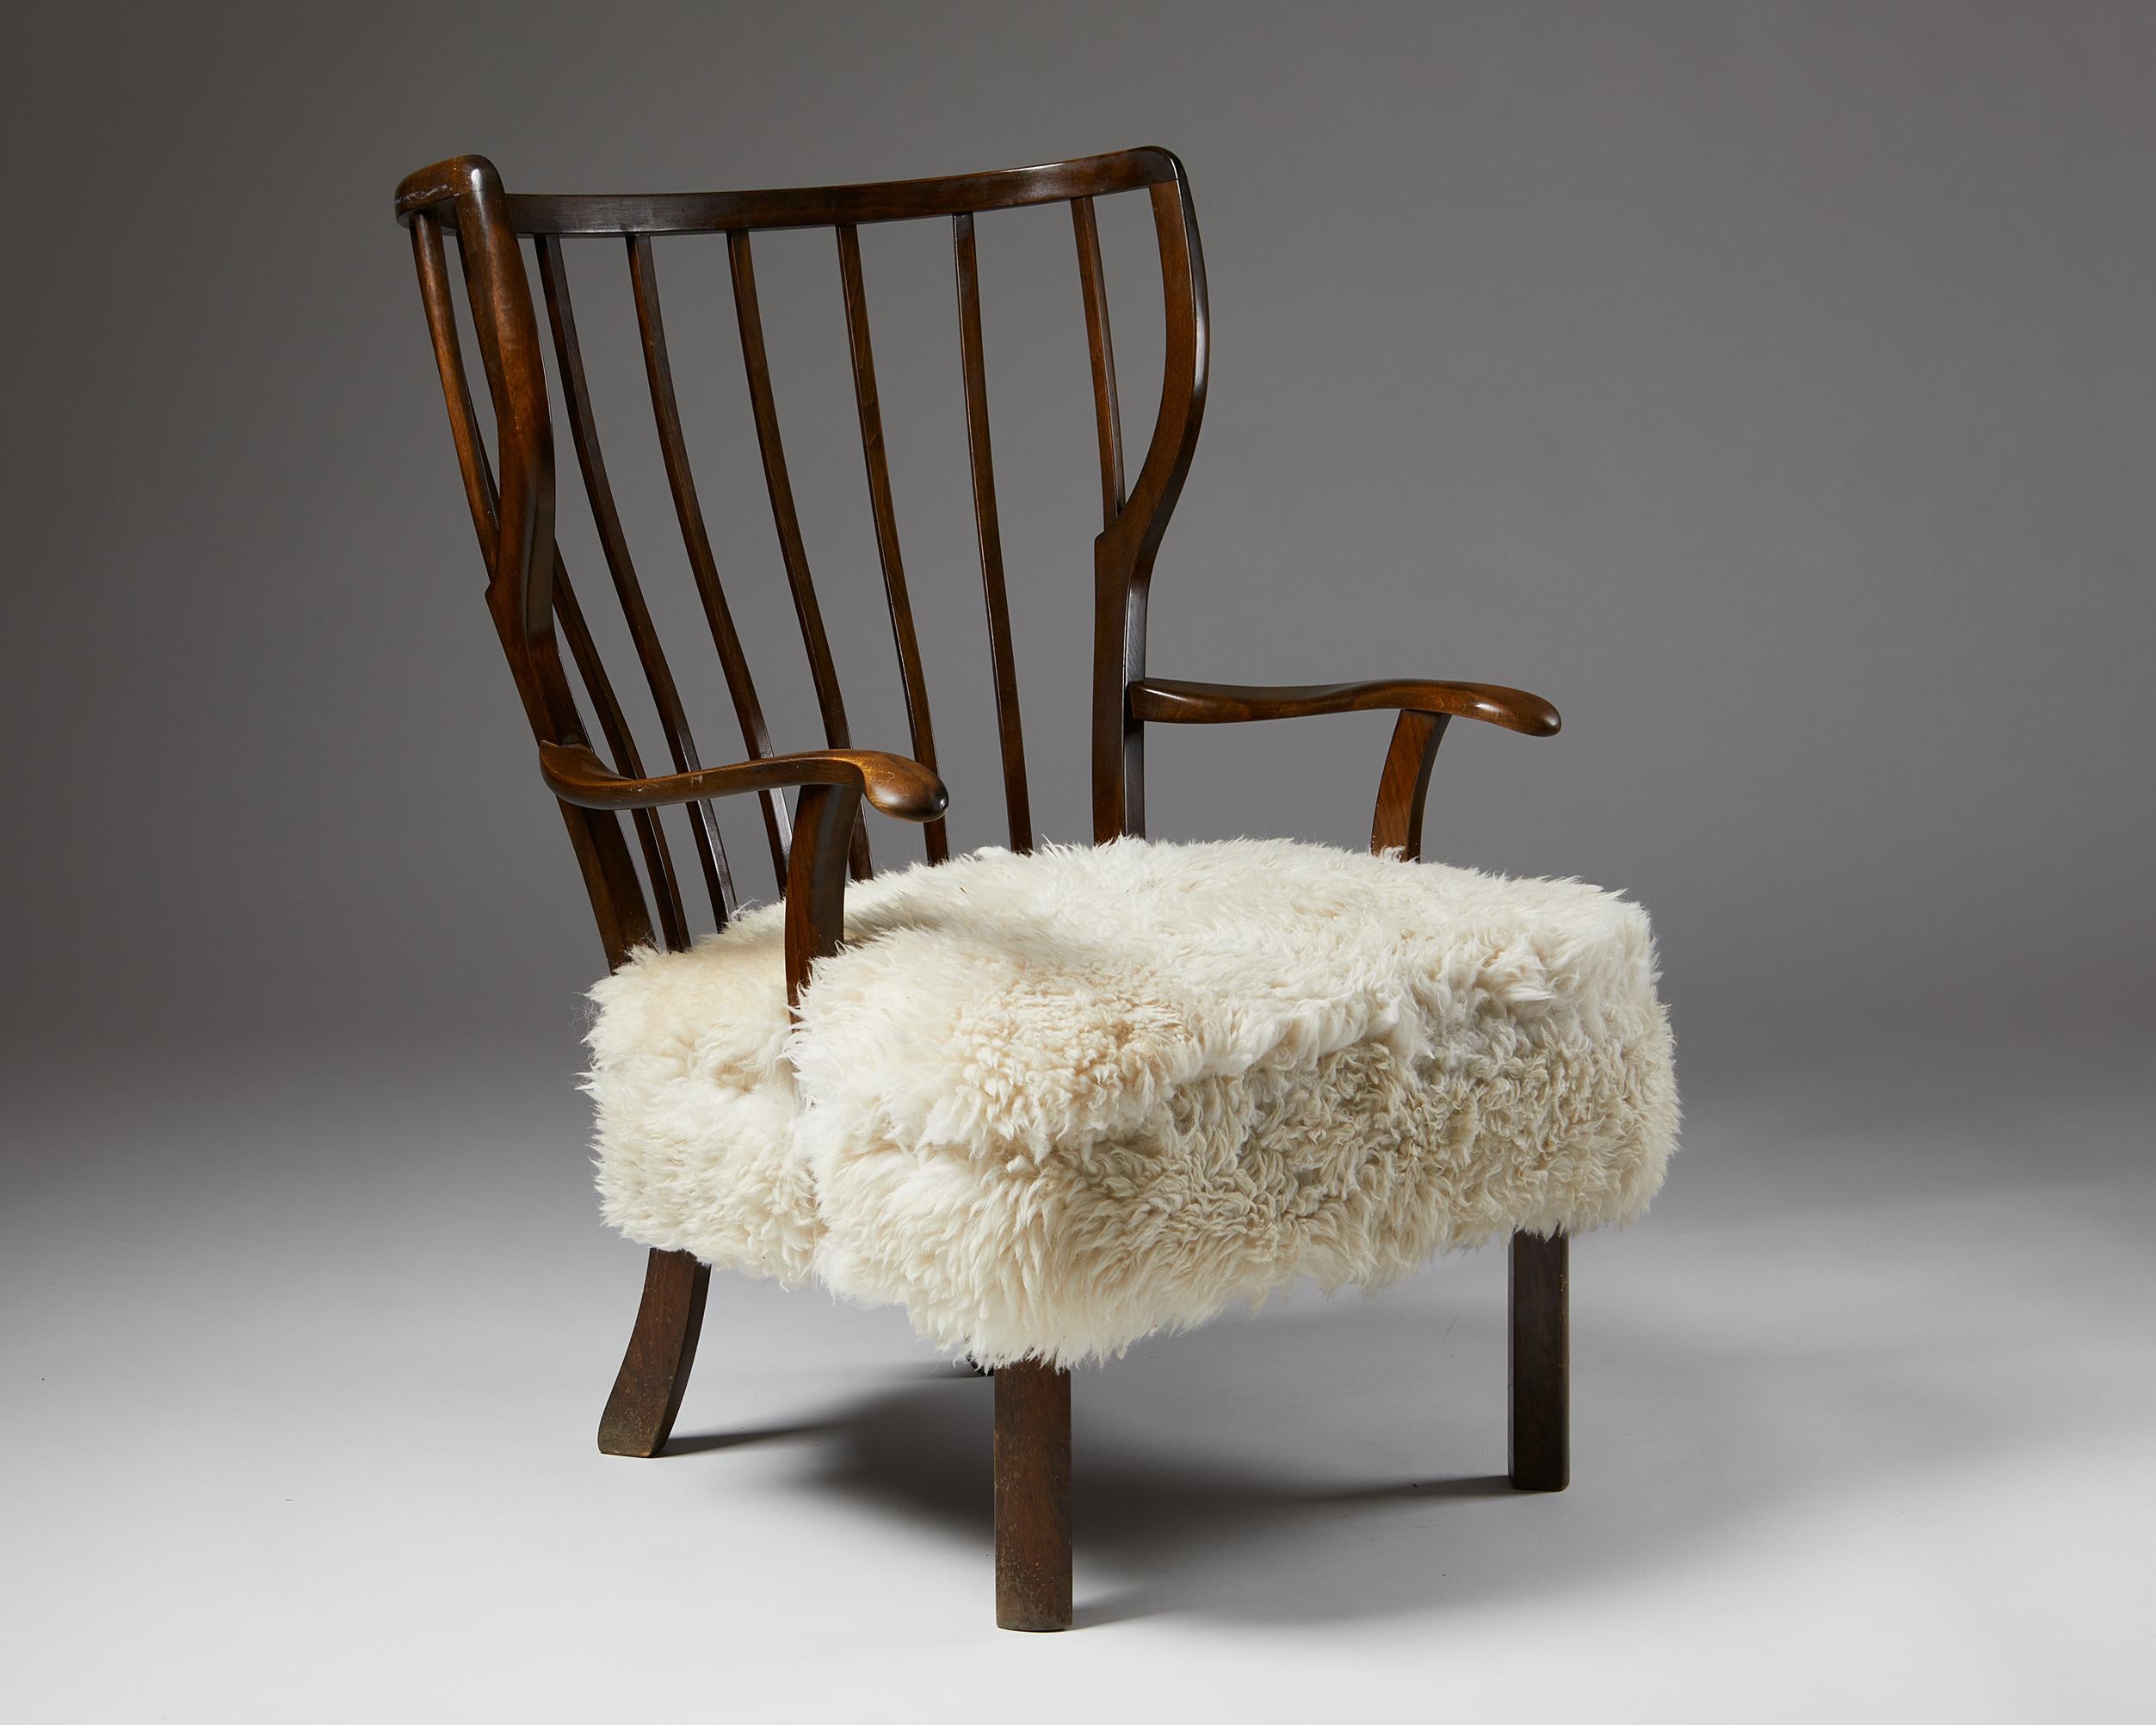 Stained beech wood and sheepskin.

Measures: H: 100 cm / 39 1/3’’
SH: 47 cm / 18 ½’’
W: 69 cm / 27’’
D: 83 cm / 32 2/3’’.
 